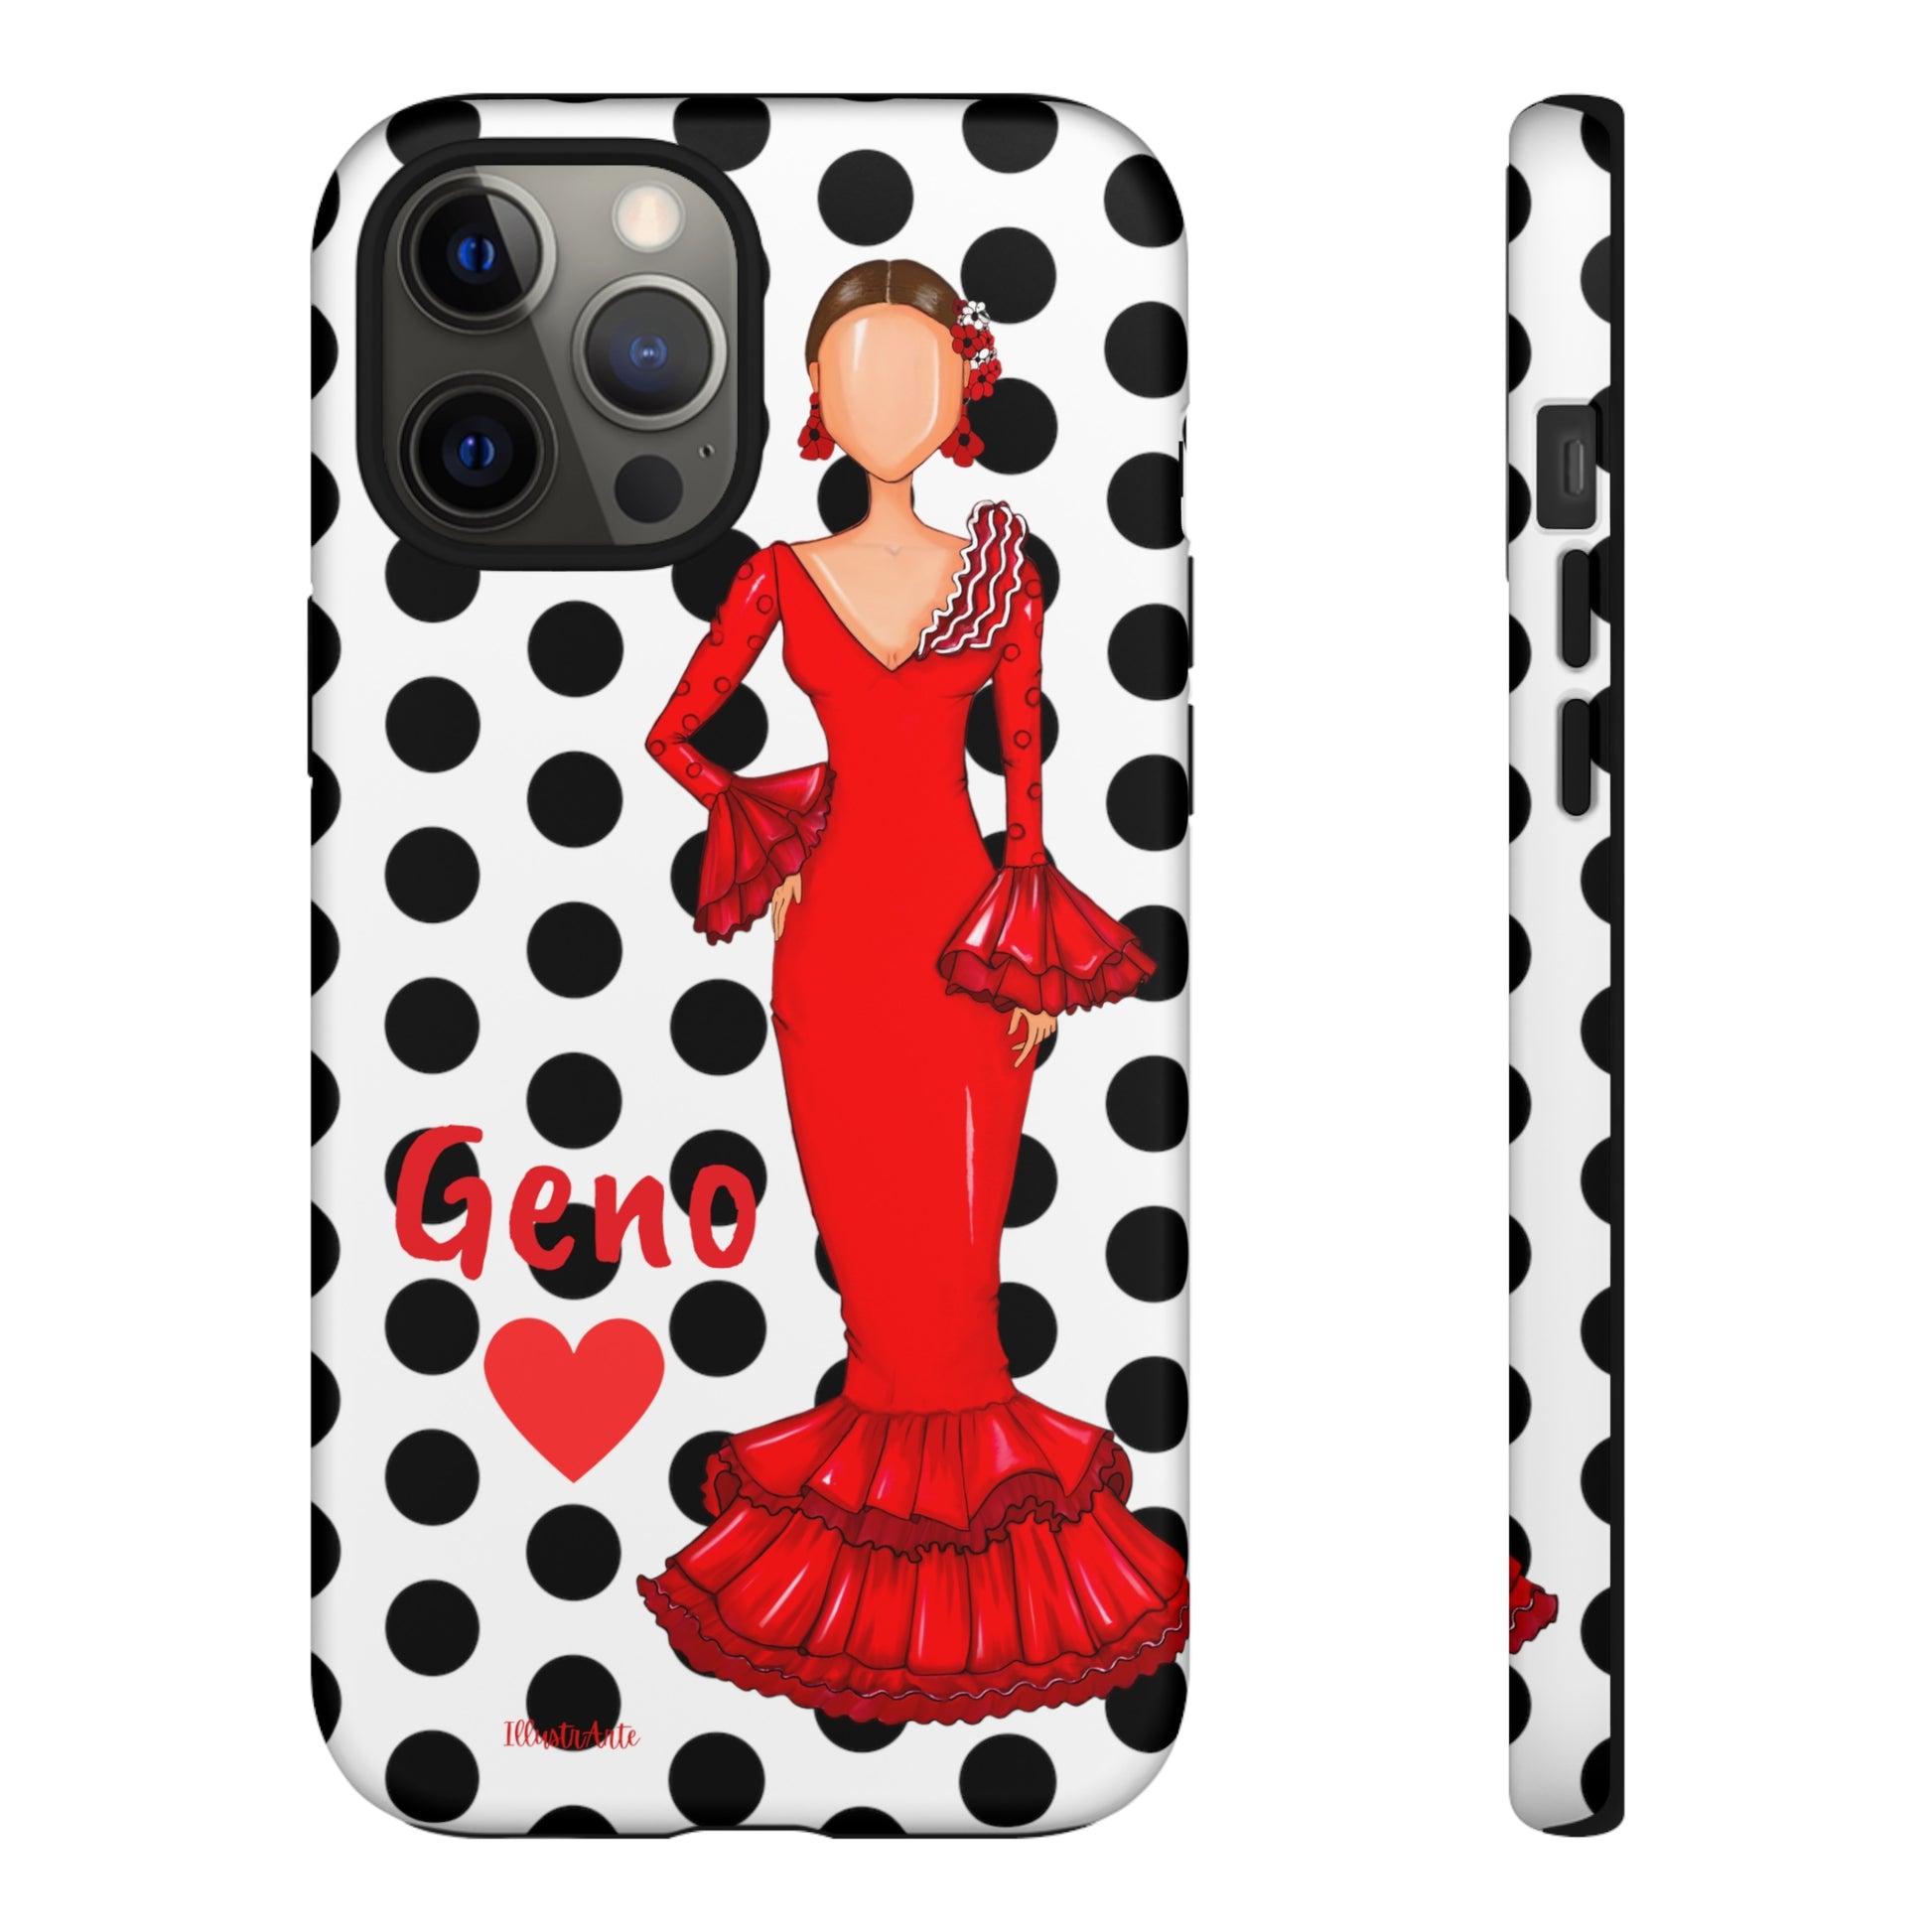 a cell phone case with a woman in a red dress